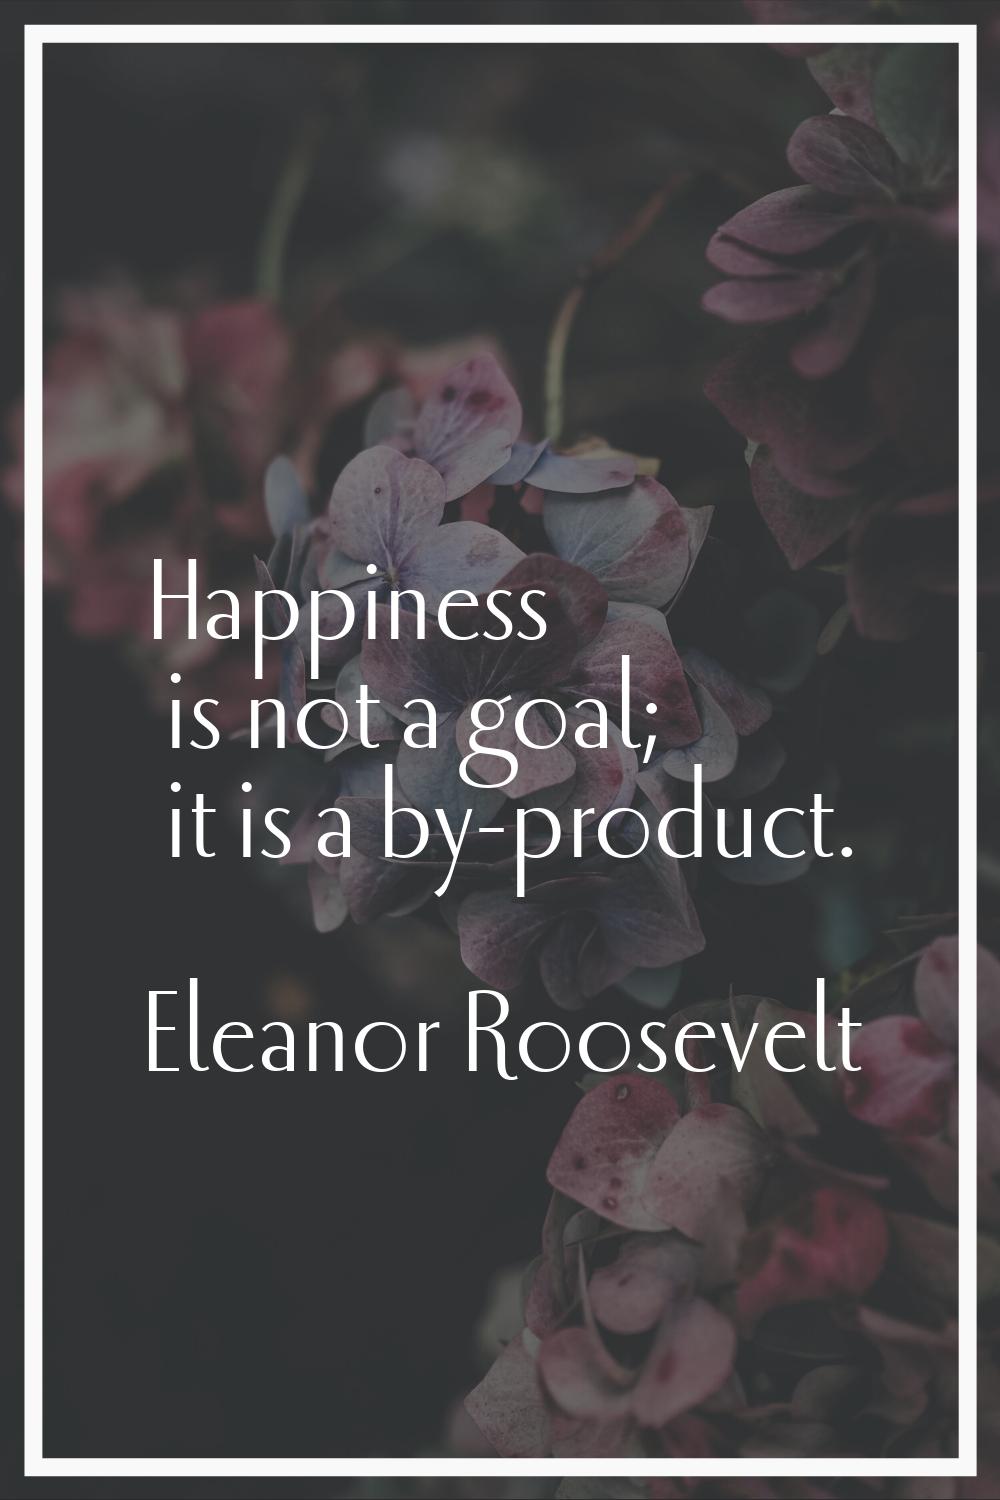 Happiness is not a goal; it is a by-product.